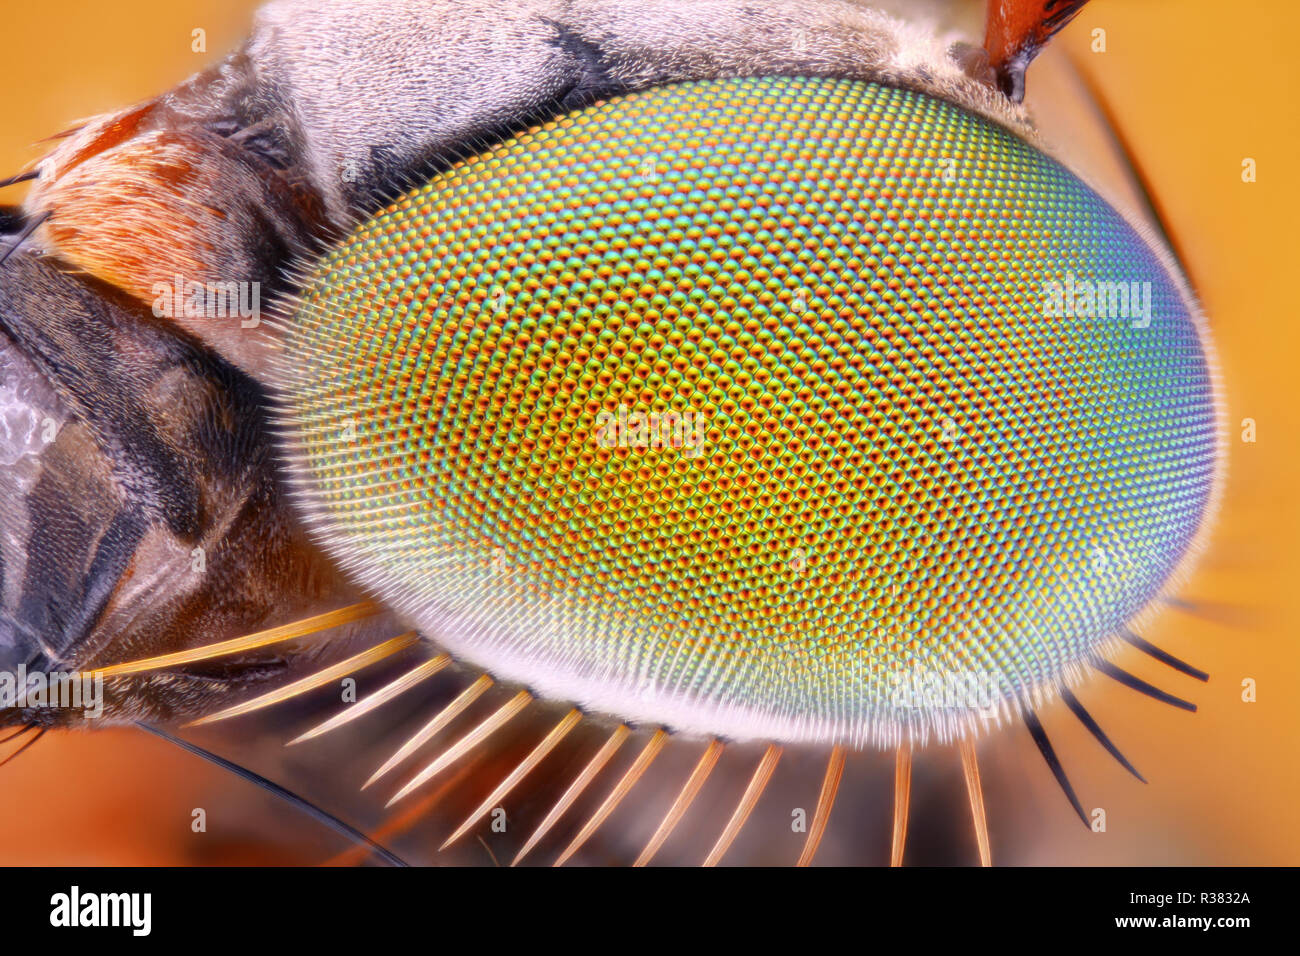 Extremely sharp and detailed insect compound eye surface at an extreme magnification taken with a microscope objective. Stock Photo